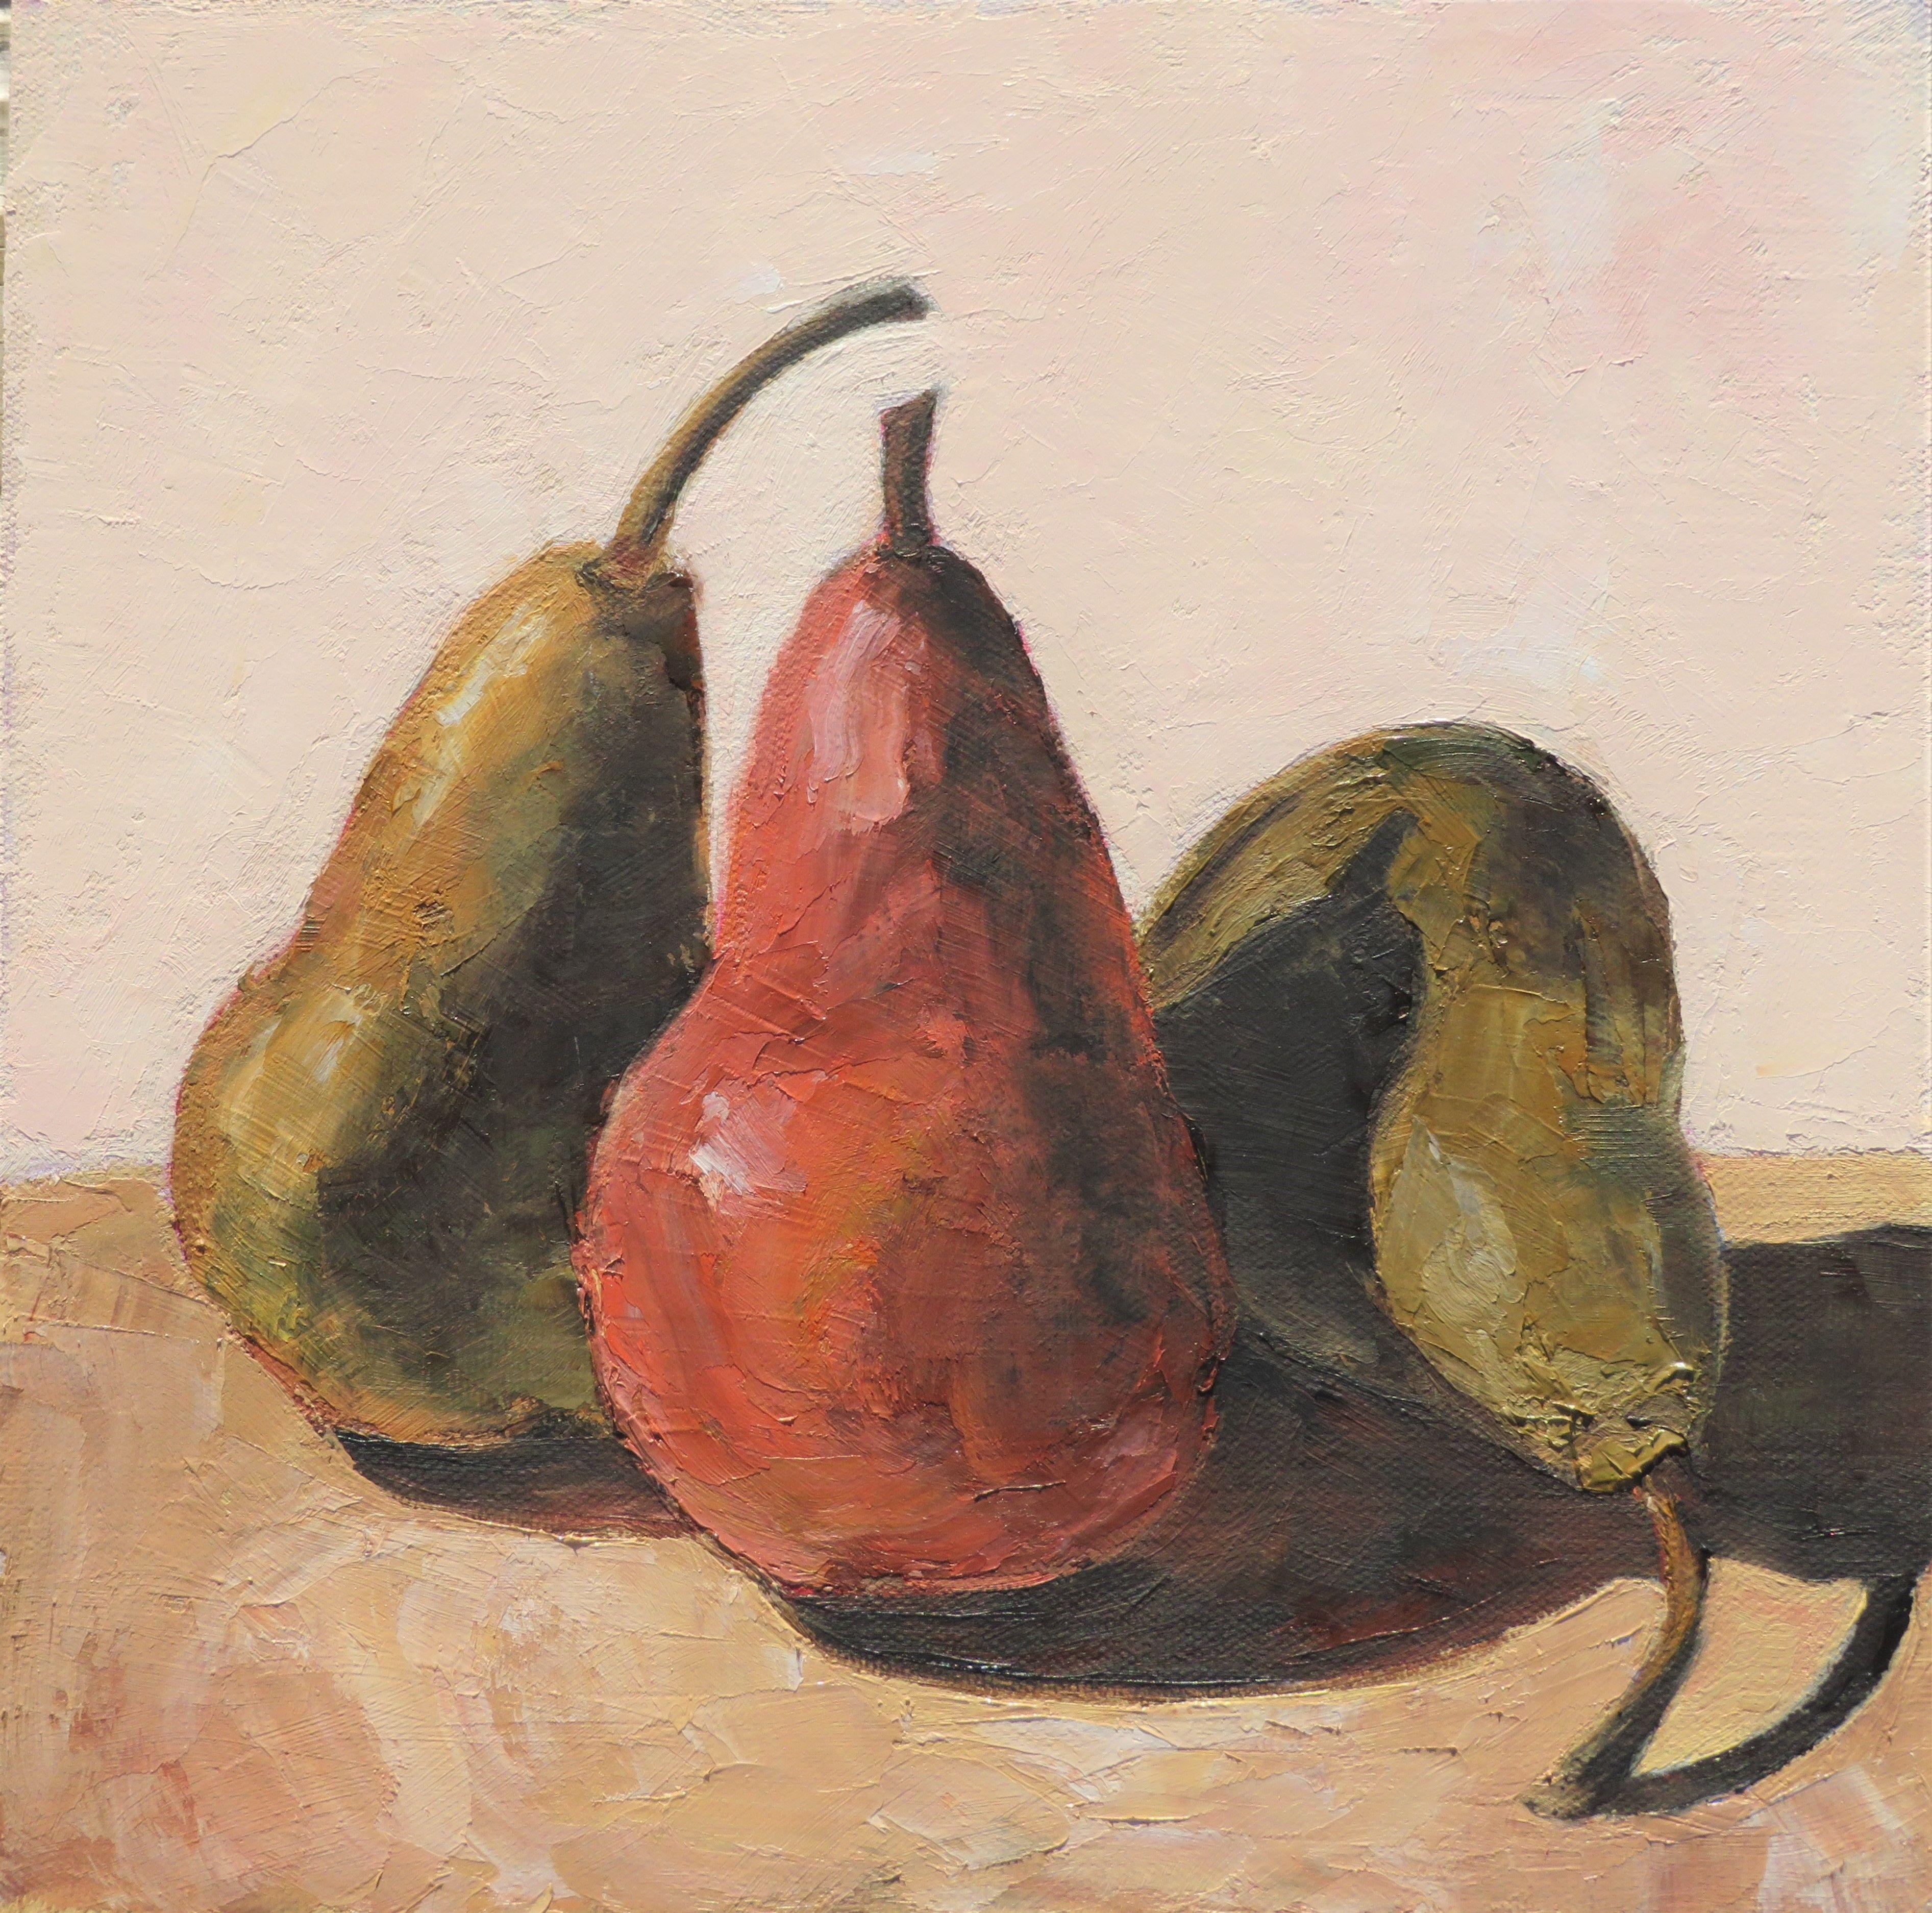 This simple still life of pears has a warm light to it.  One pear can't seem to stand up so rests comfortably on its side unconcerned that it's overshadowed.  This 10x10" painting was done with quality oil paints on a Raymar panel and is set in a